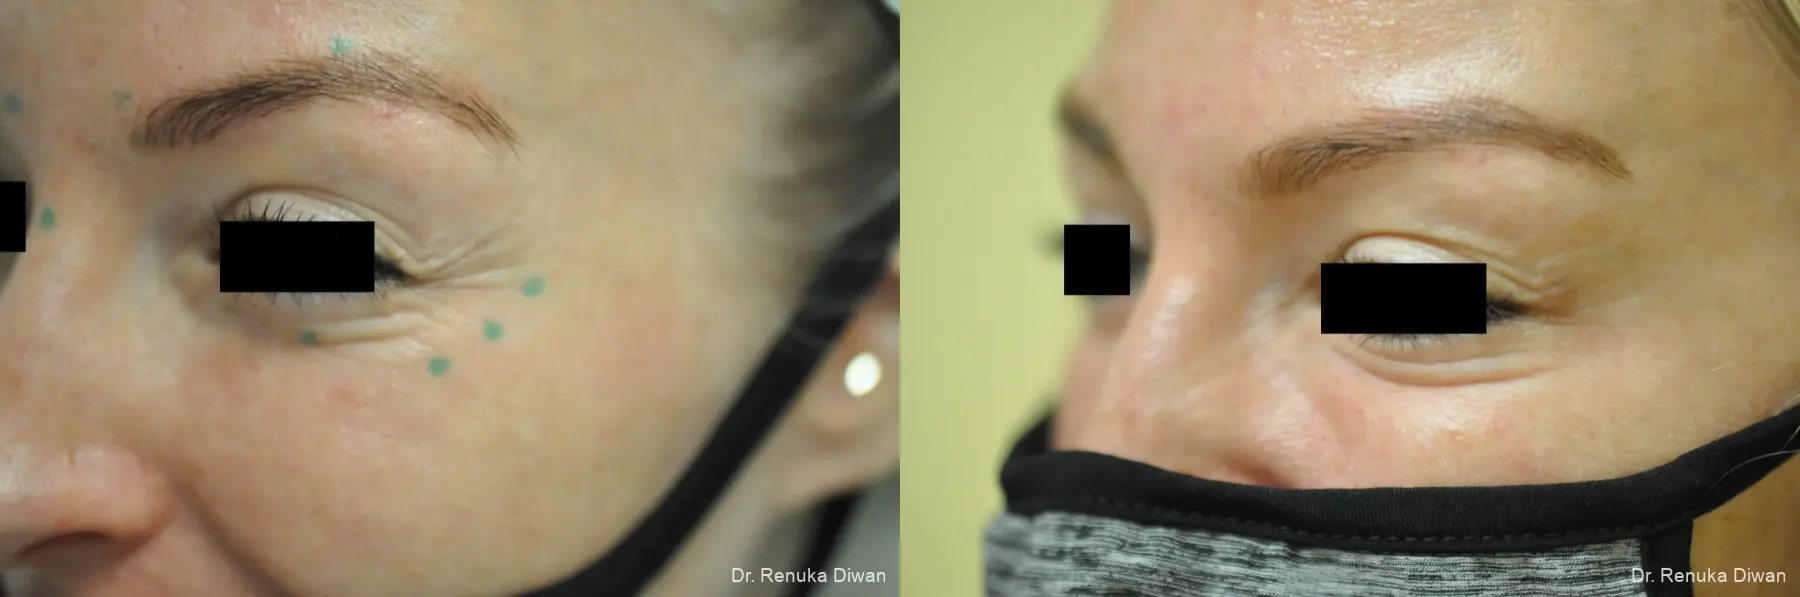 Crows Feet Creases: Patient 6 - Before and After 2